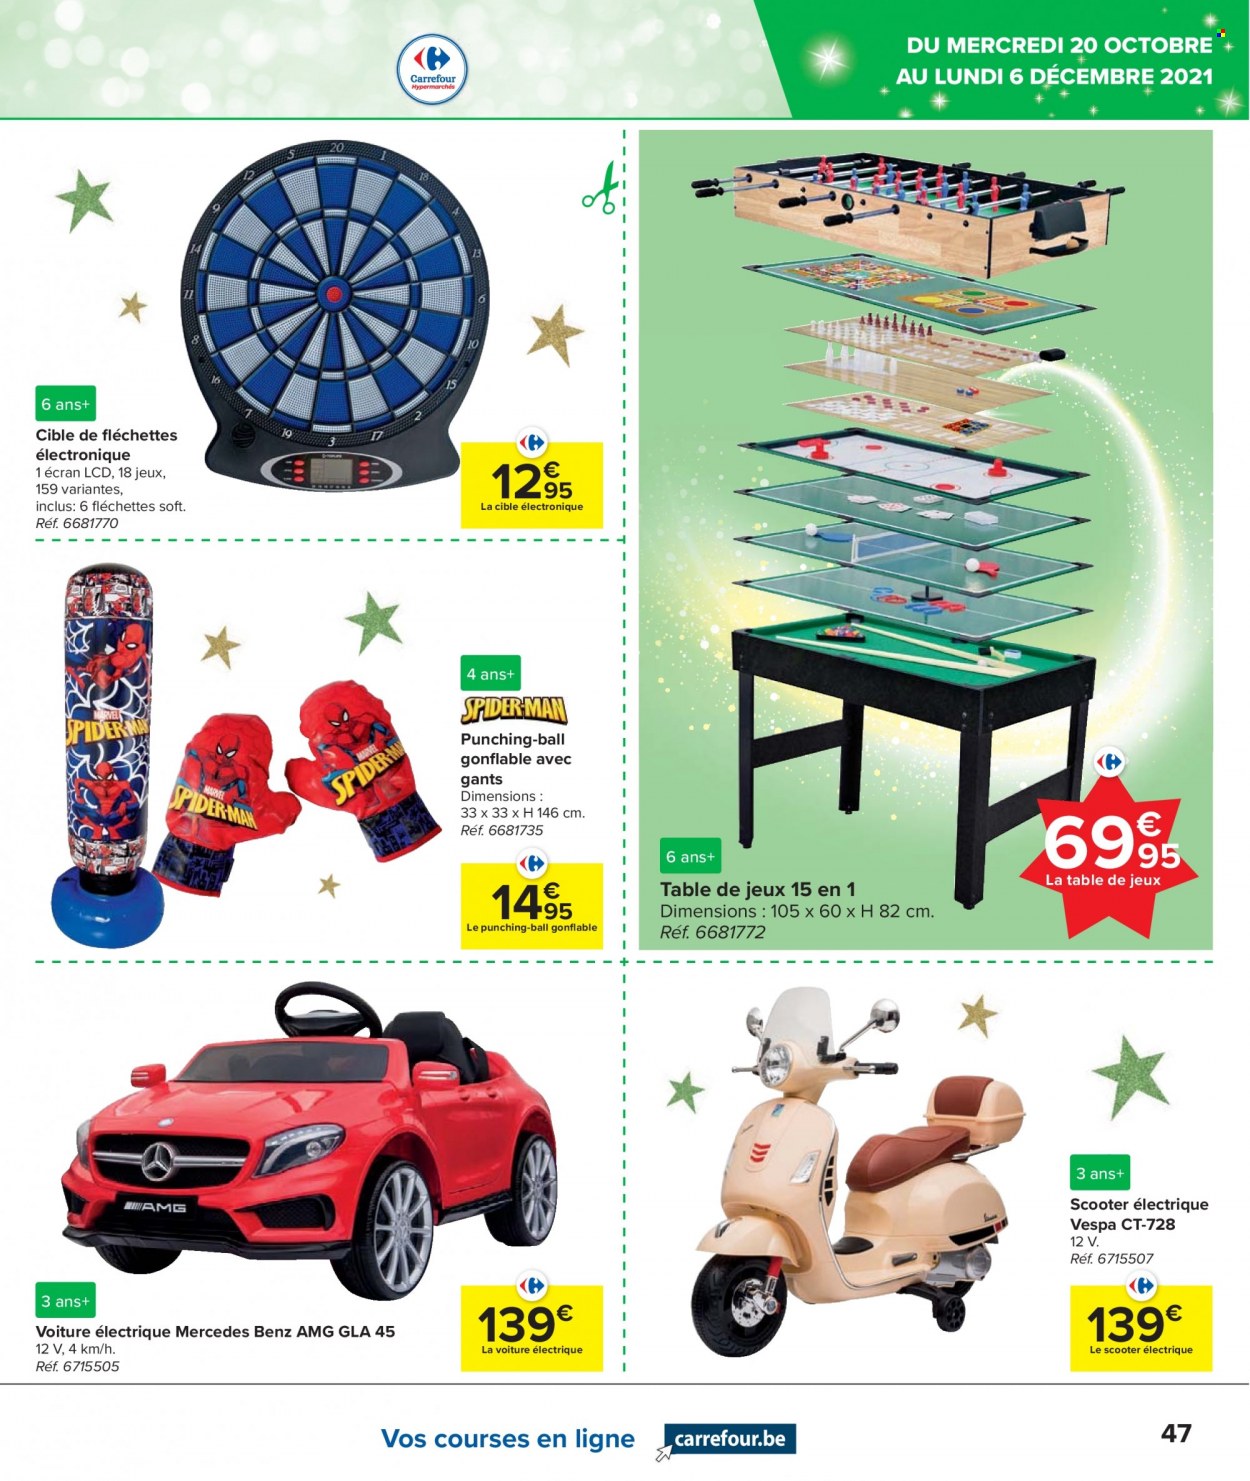 Catalogue Carrefour hypermarkt - 20.10.2021 - 6.12.2021. Page 47.